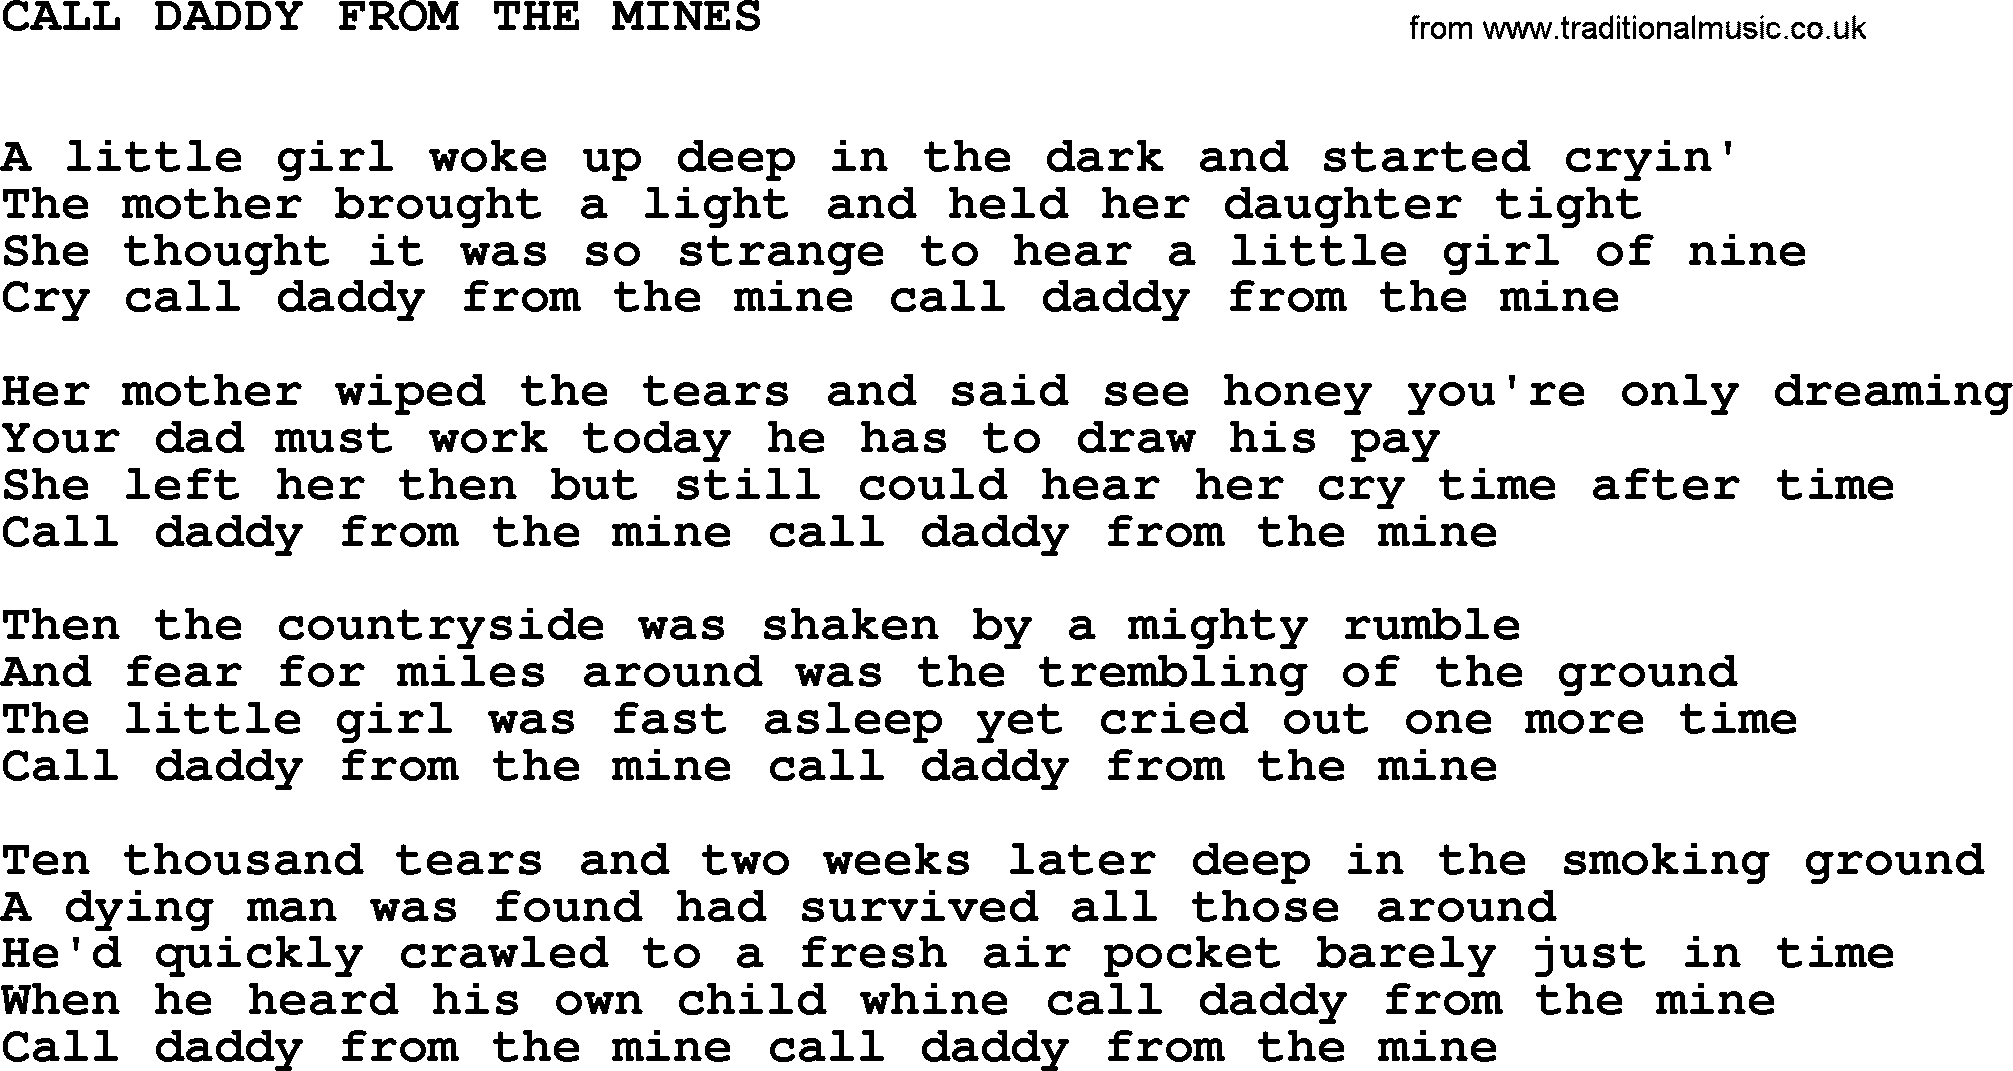 Johnny Cash song Call Daddy From The Mines.txt lyrics